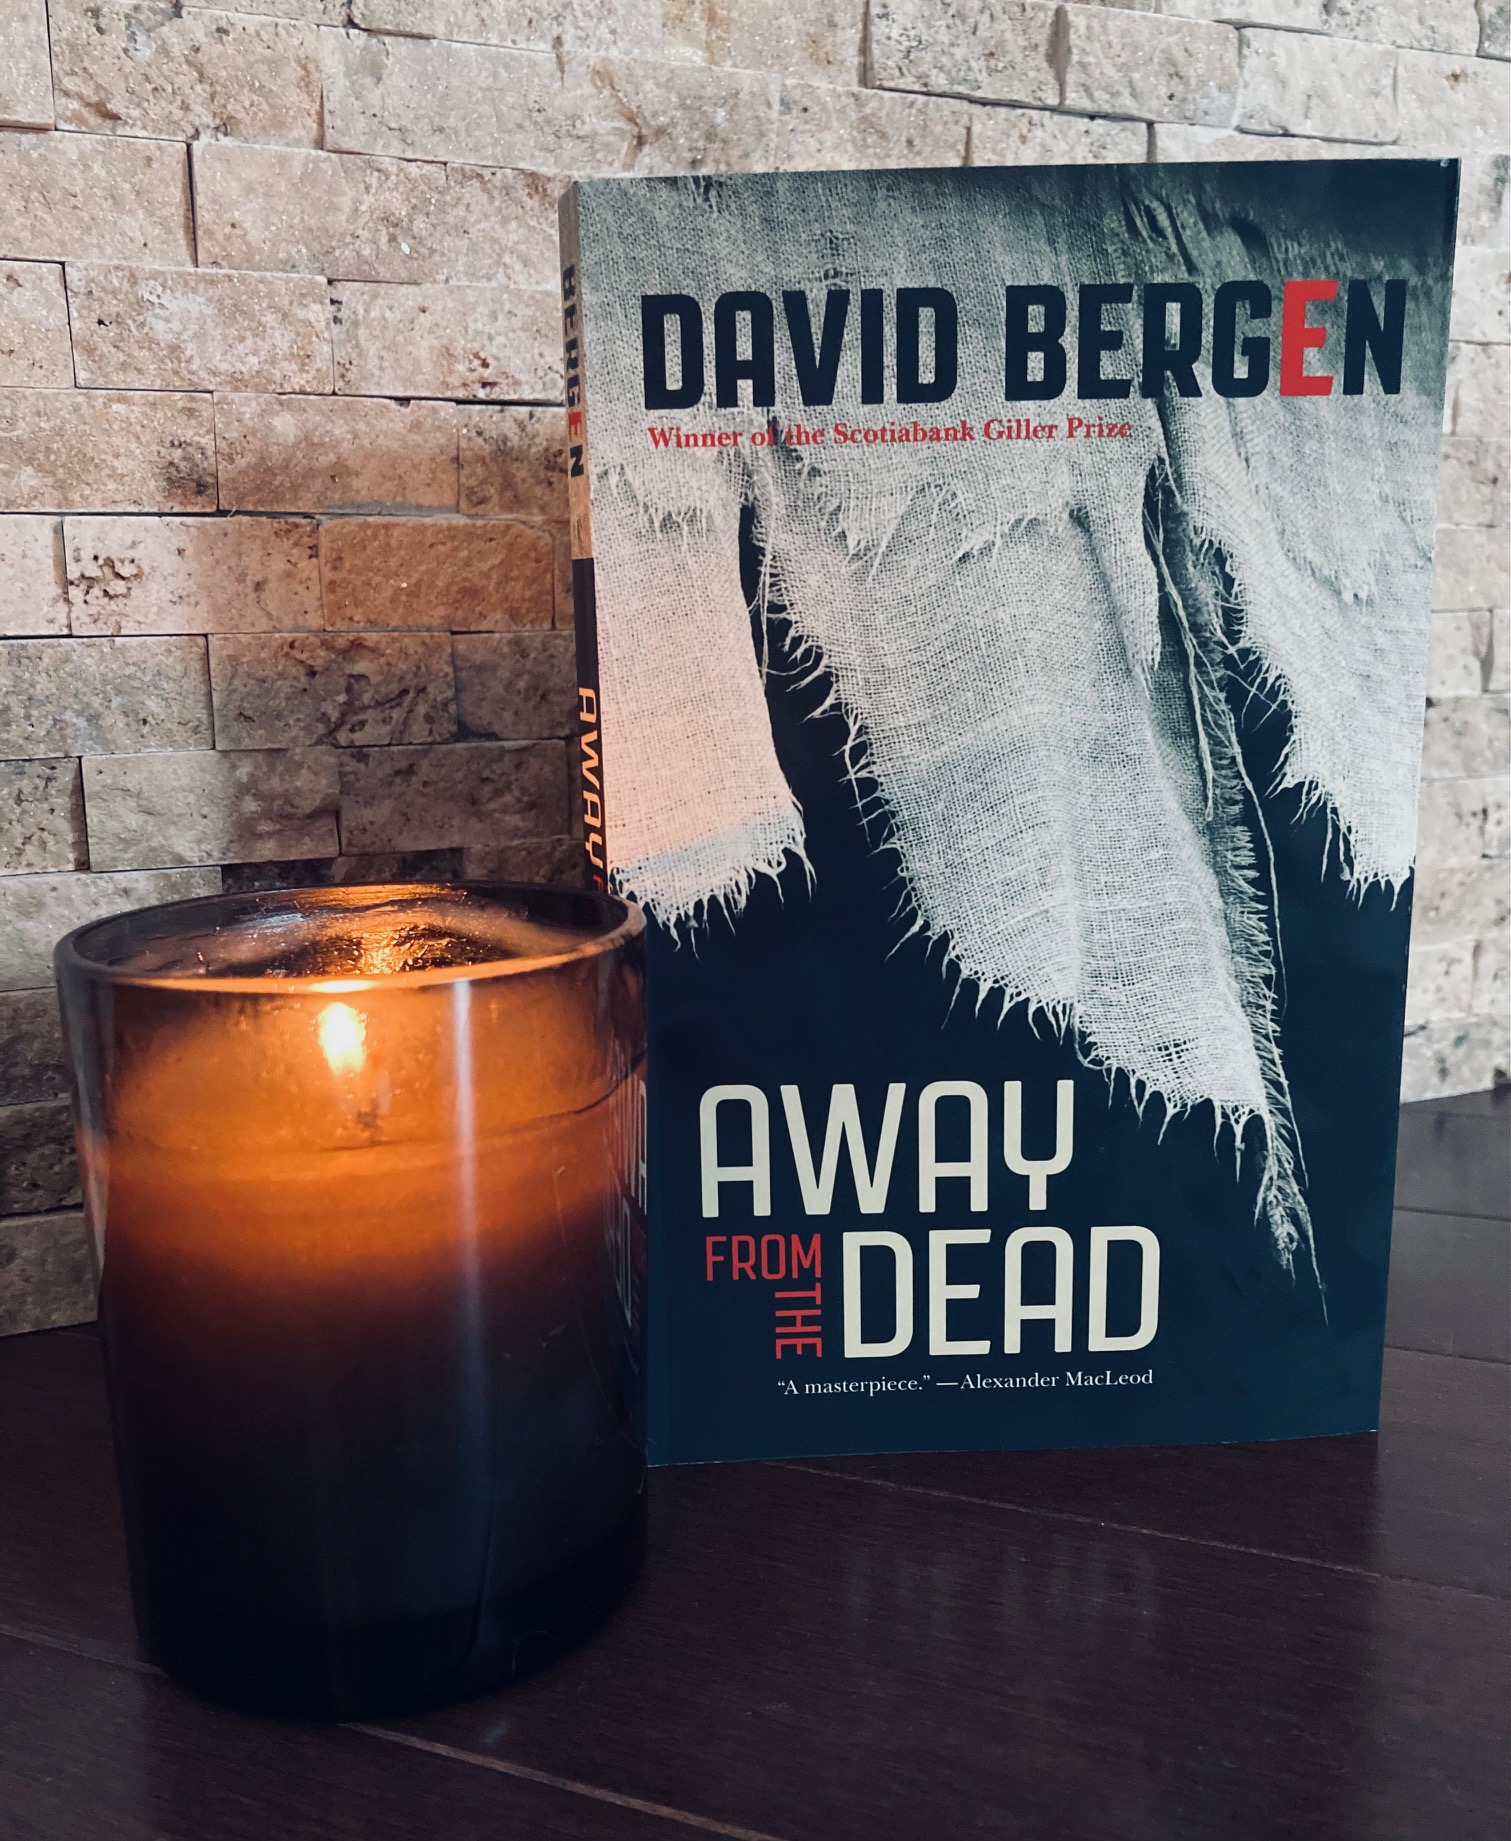 Away from the Dead by David Bergen book pictured beside a candle burning